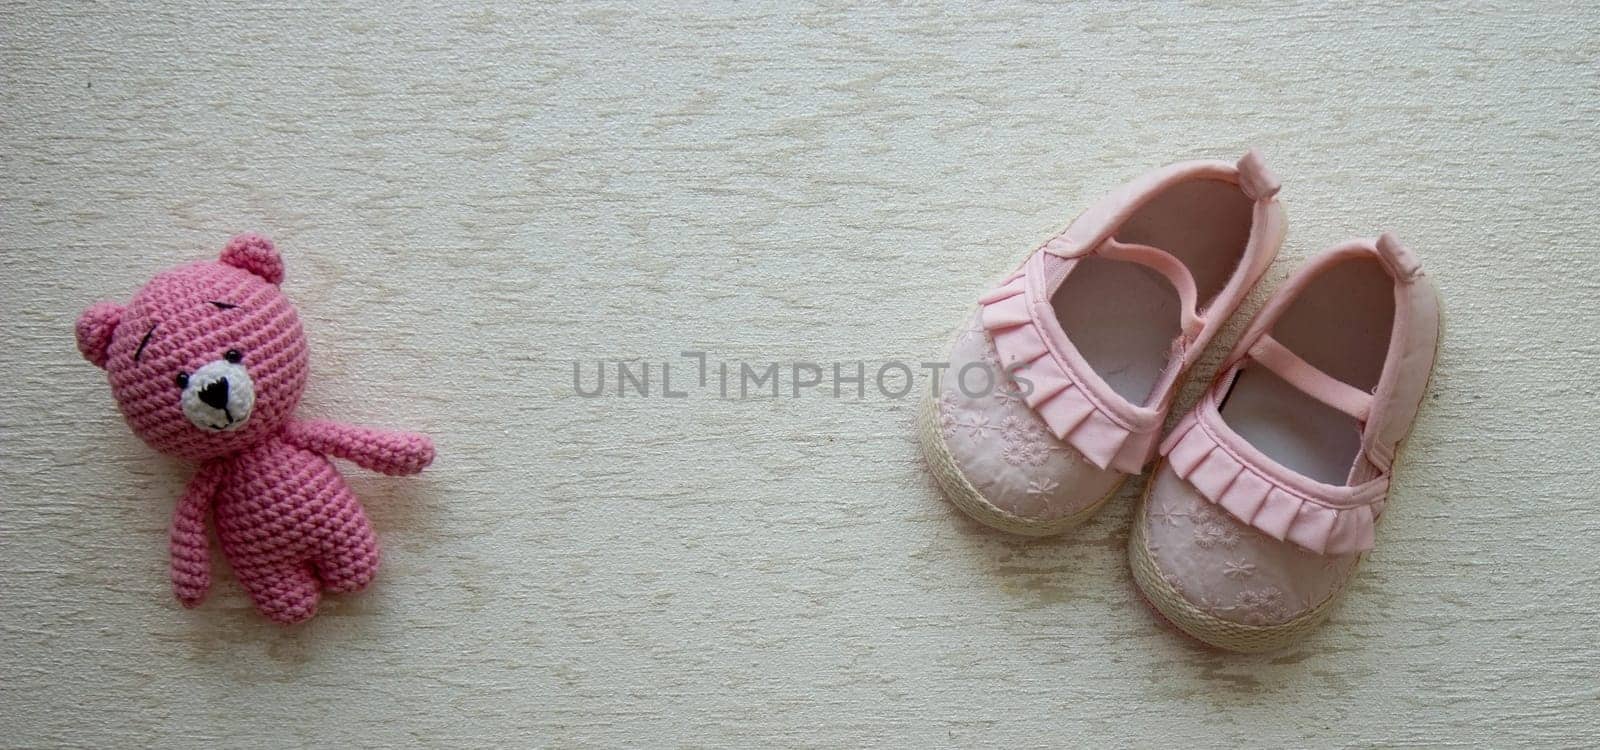 Children's shoes and teddy bear on a light background. Background with place for text.